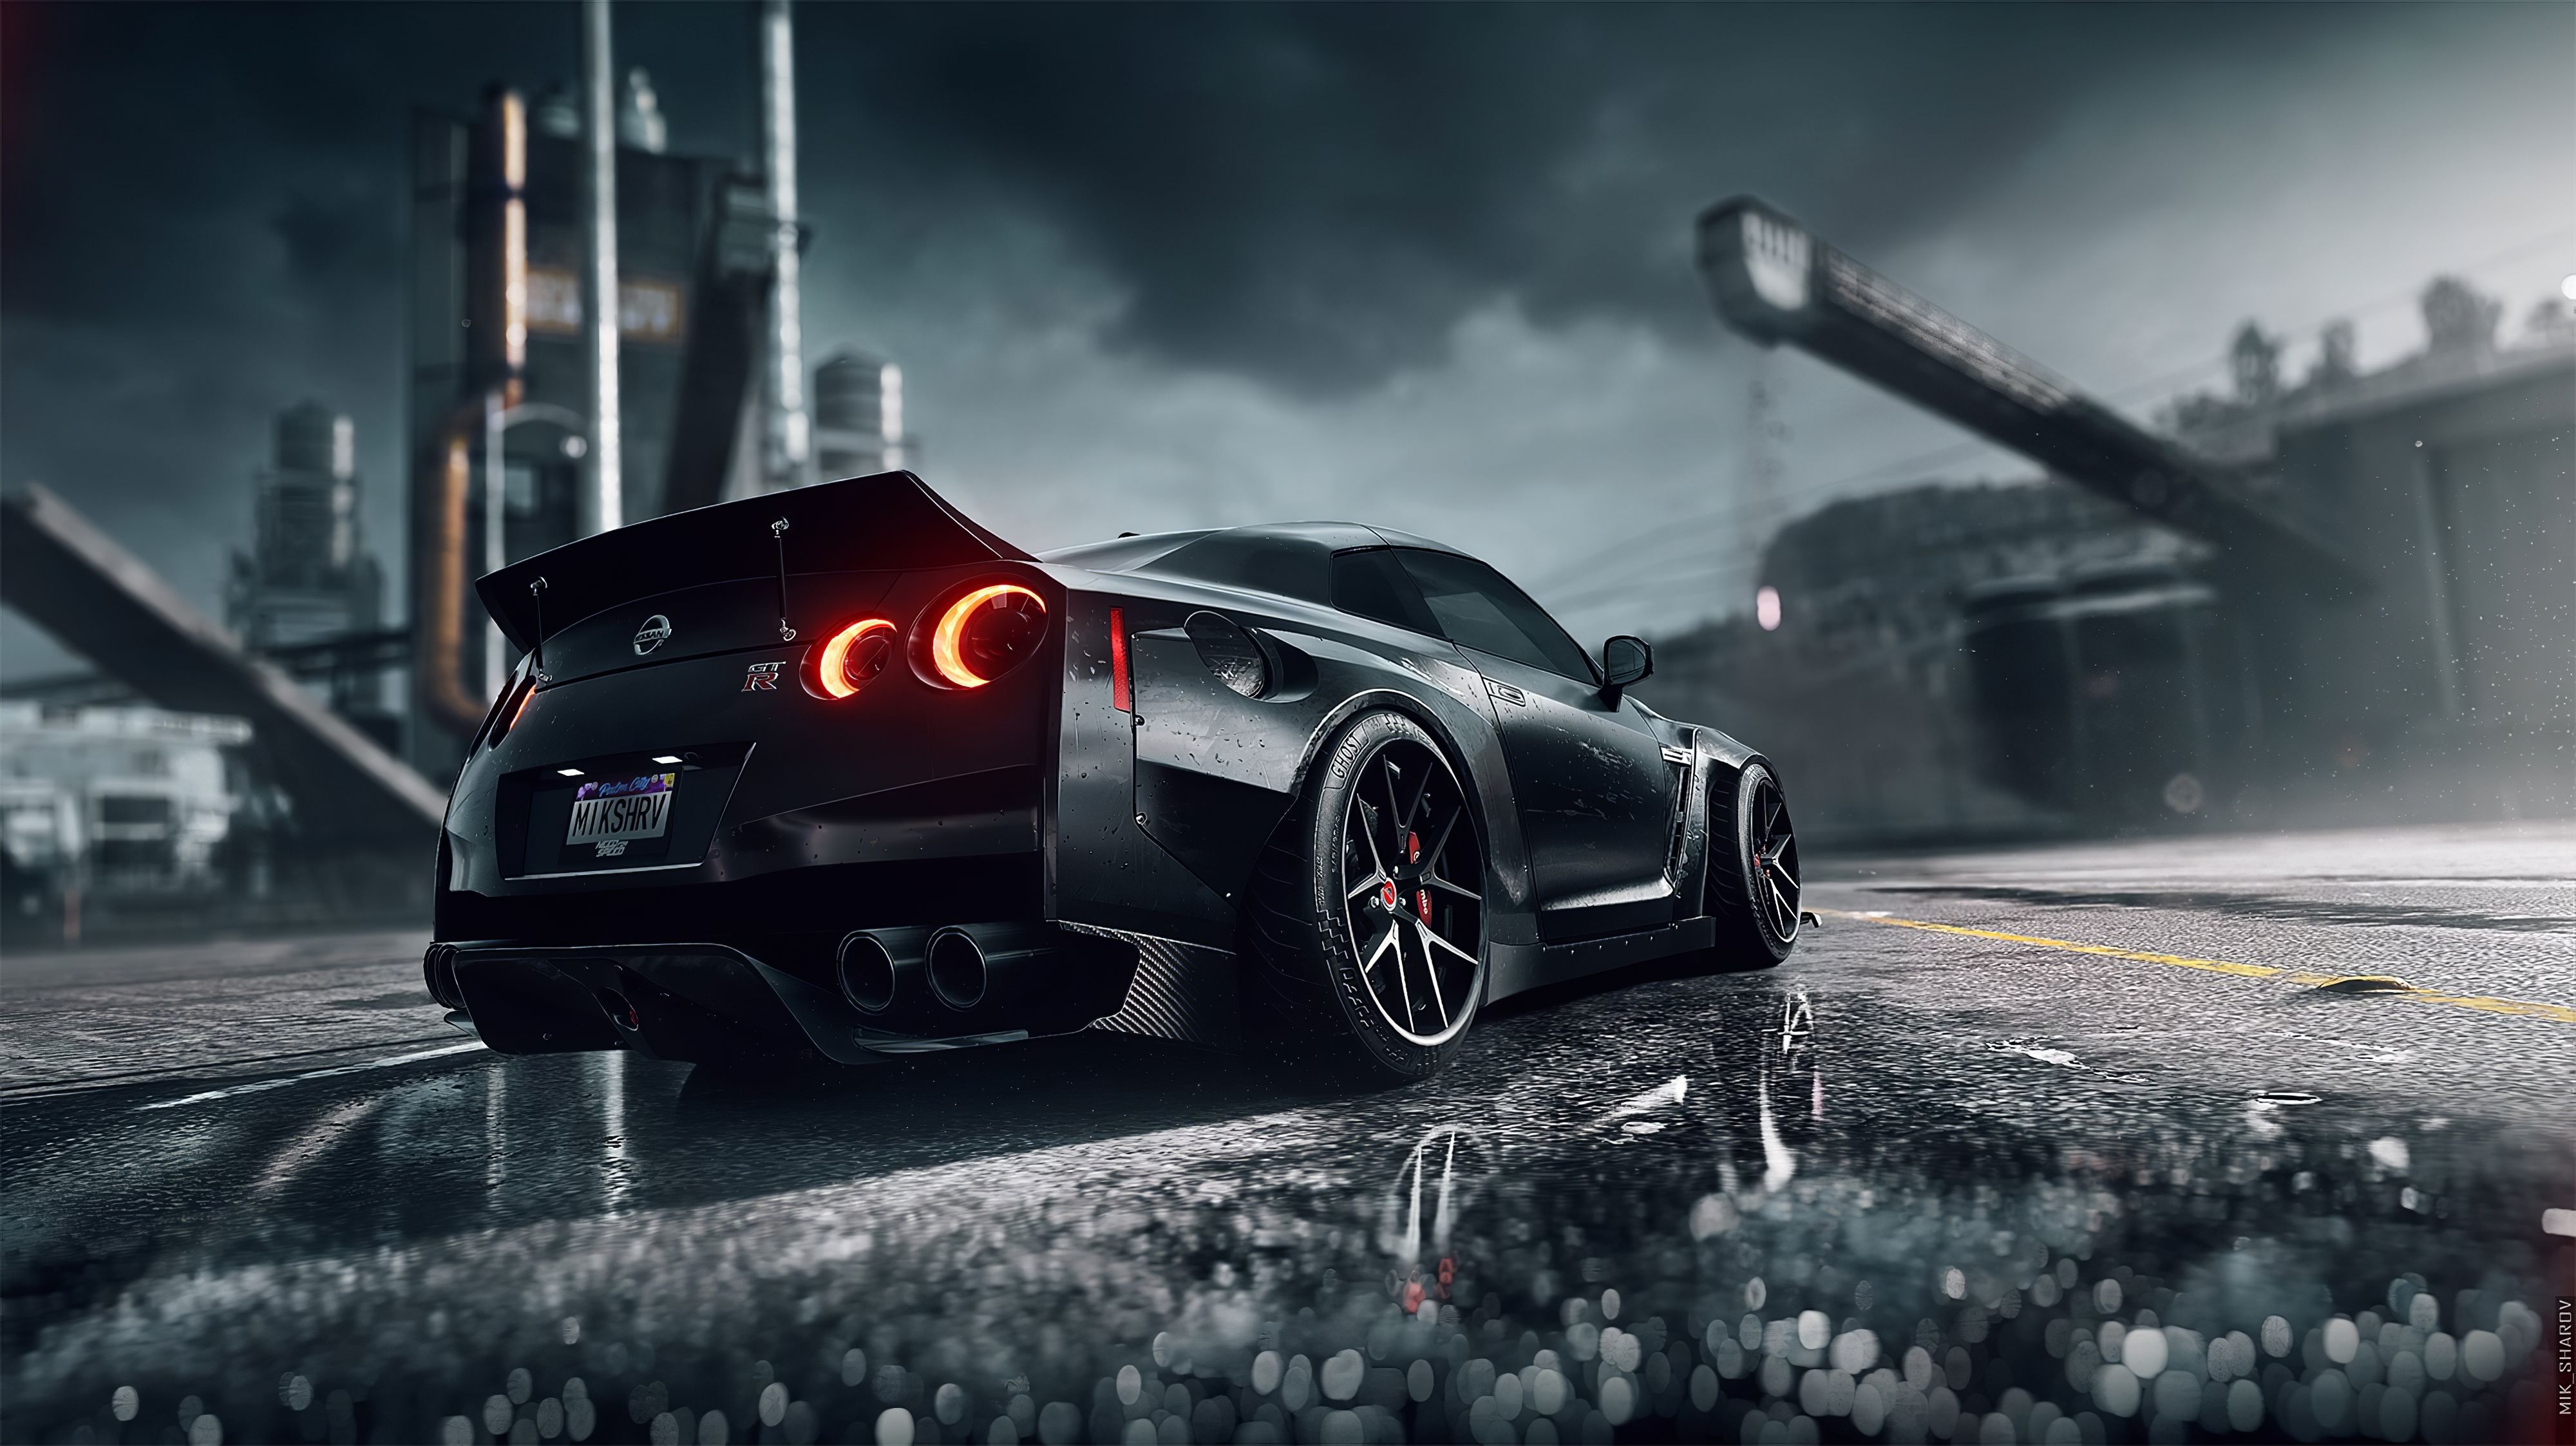 download free need for speed unbound